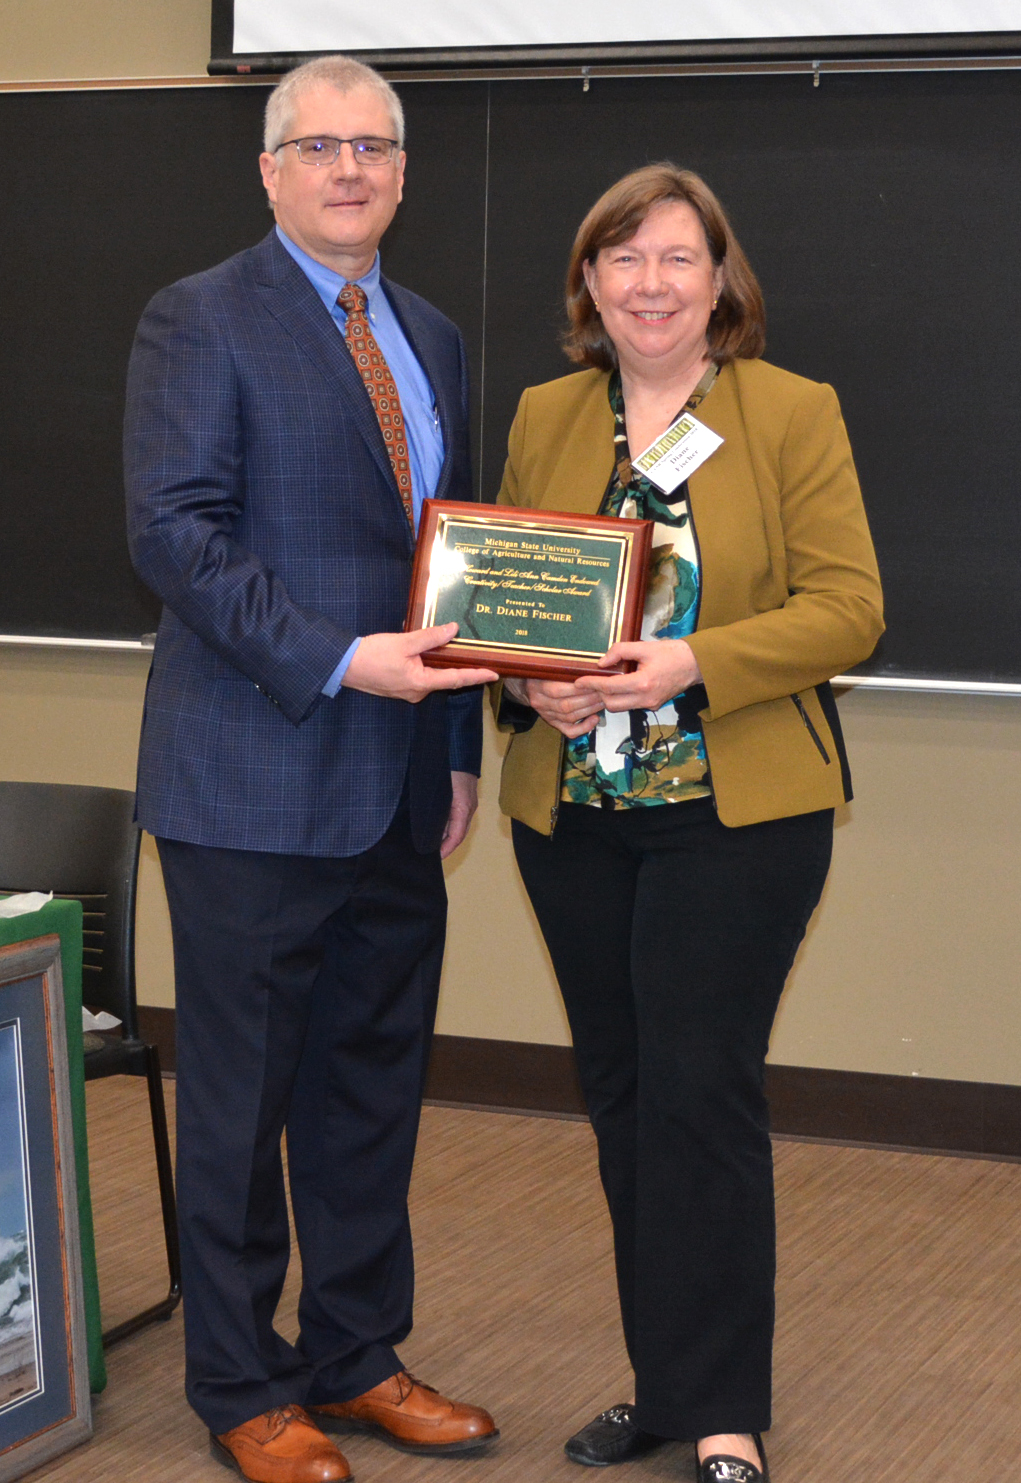 CANR faculty member Diane Fischer received the Camden award from Dean Ron Hendrick in 2018.